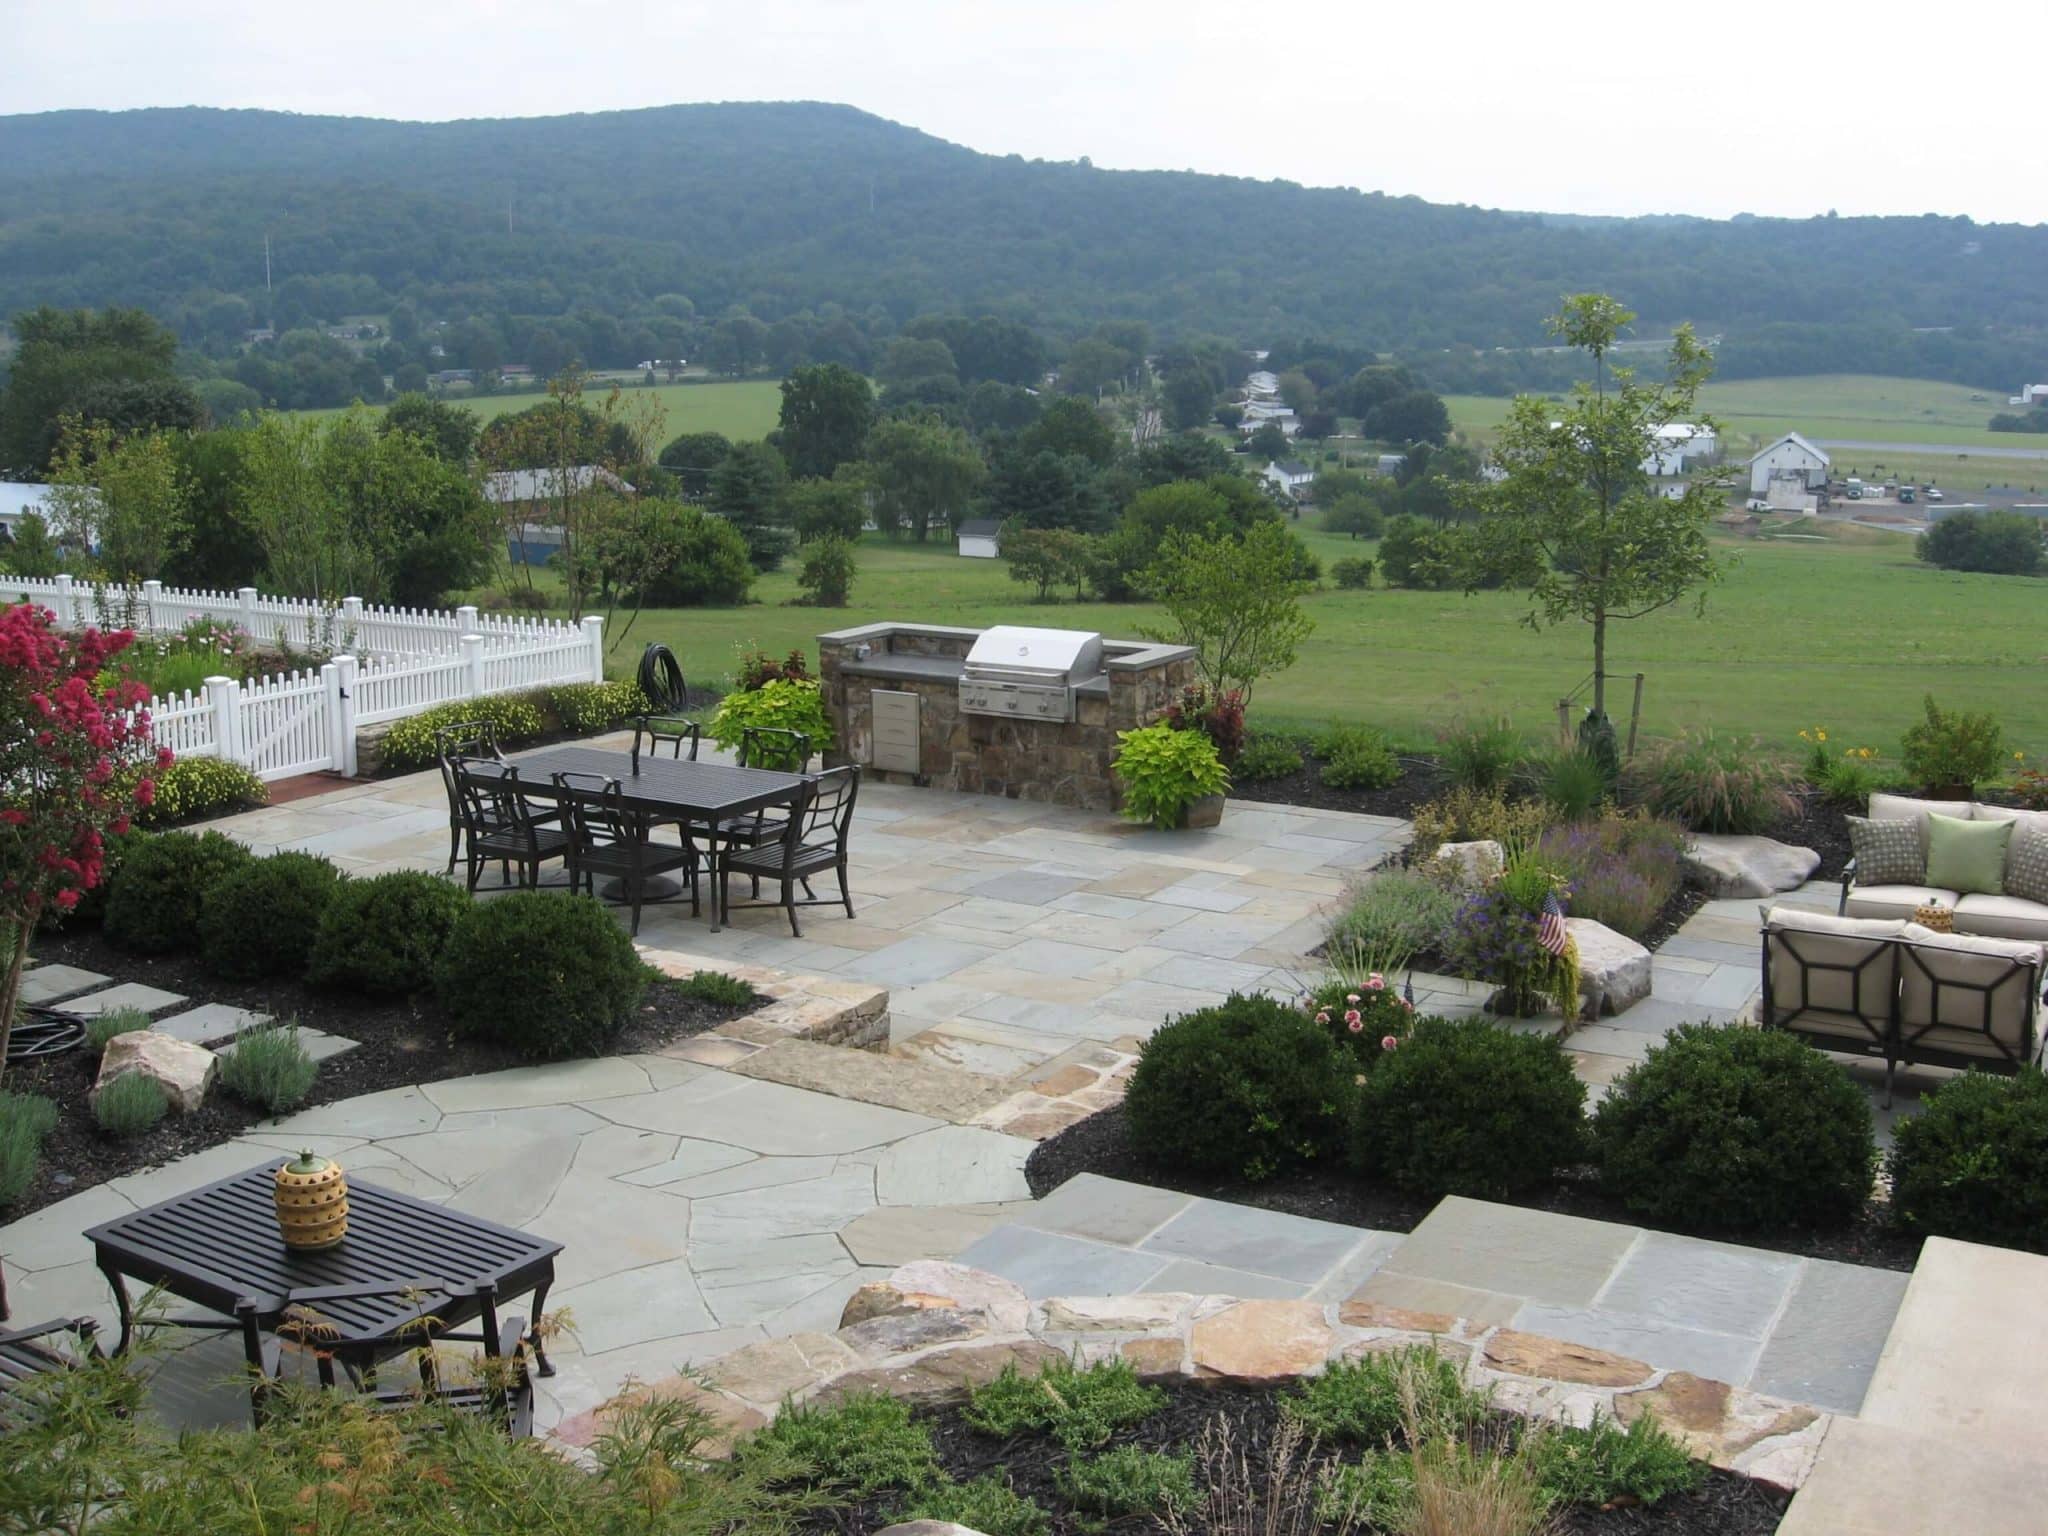 664 Formal Flagstone Patio with Stone Walls, Built In Grill, Boulders and Potager Garden